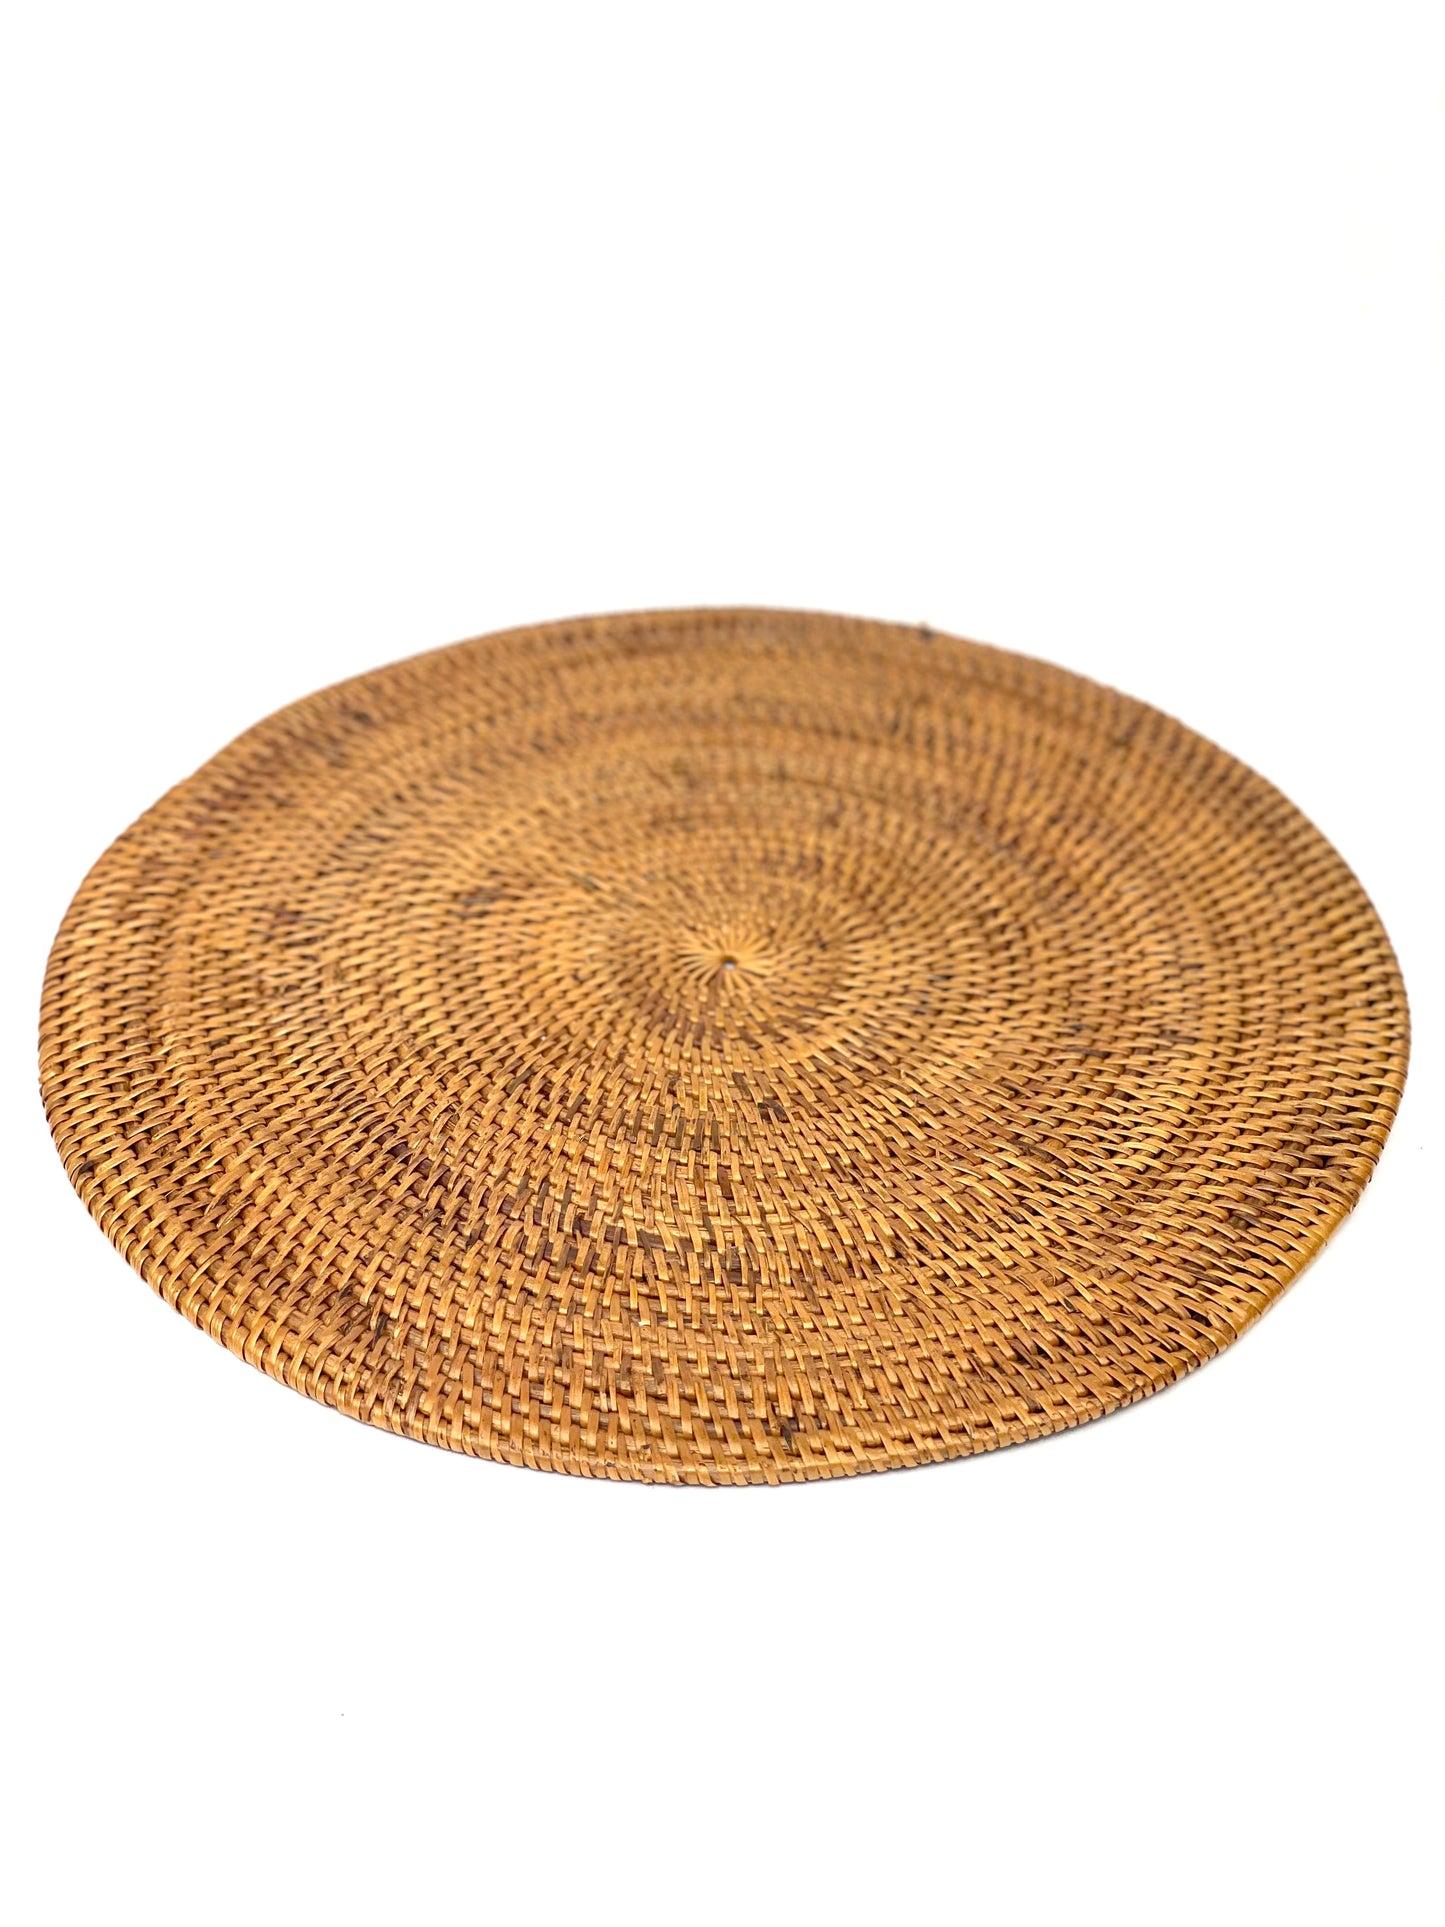 Handmade Round Rattan Chargers - Set of 2